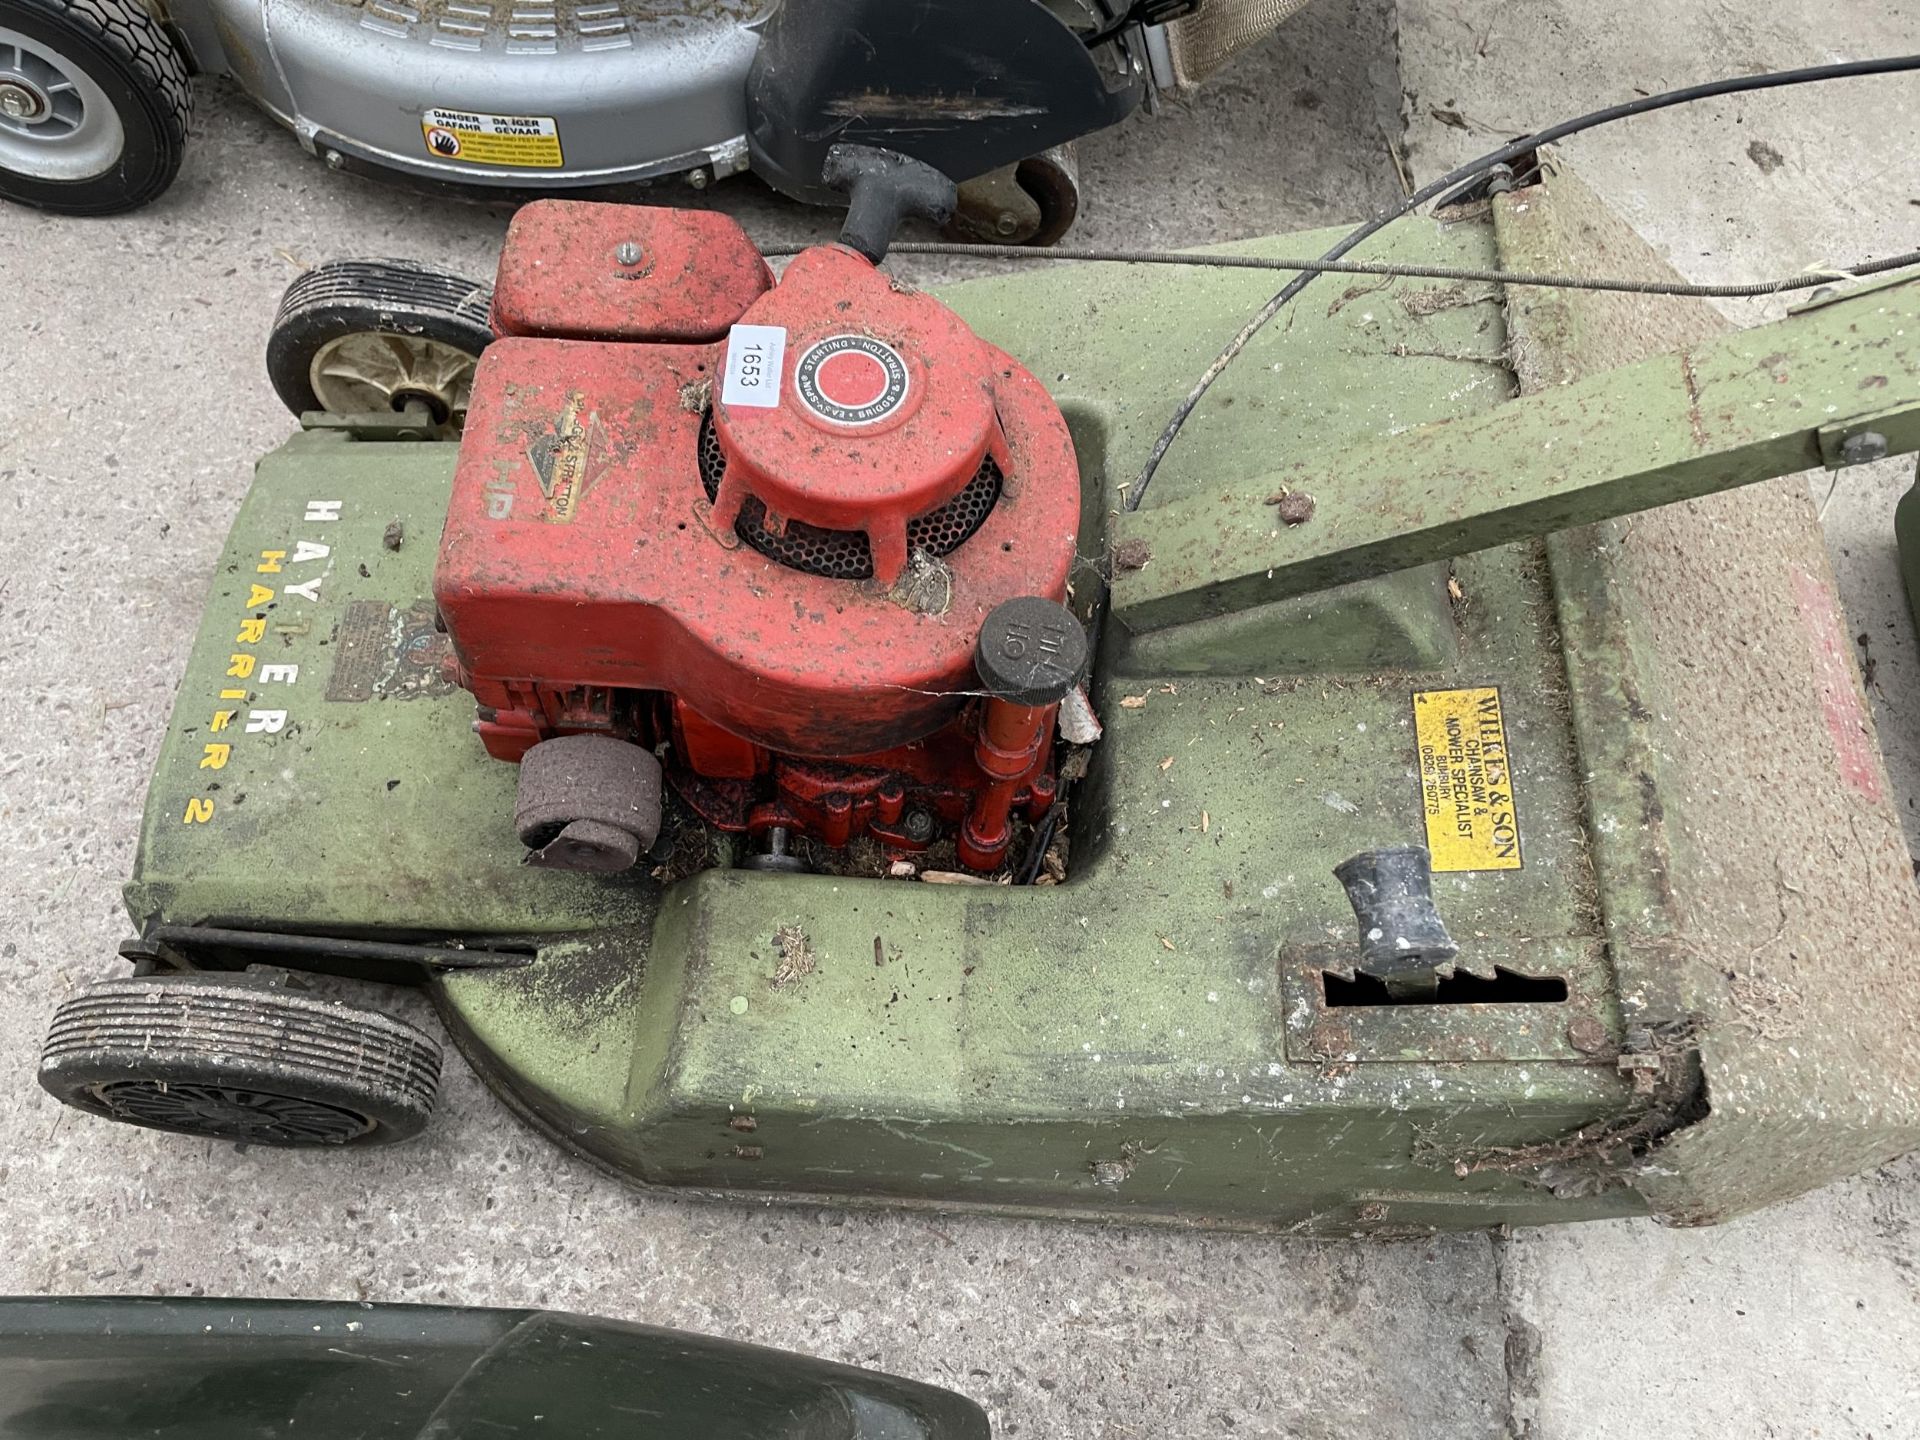 A VINTAGE HAYTER HARRIER ROTARY MOWER COMPLETE WITH GRASS BOX - Image 2 of 5